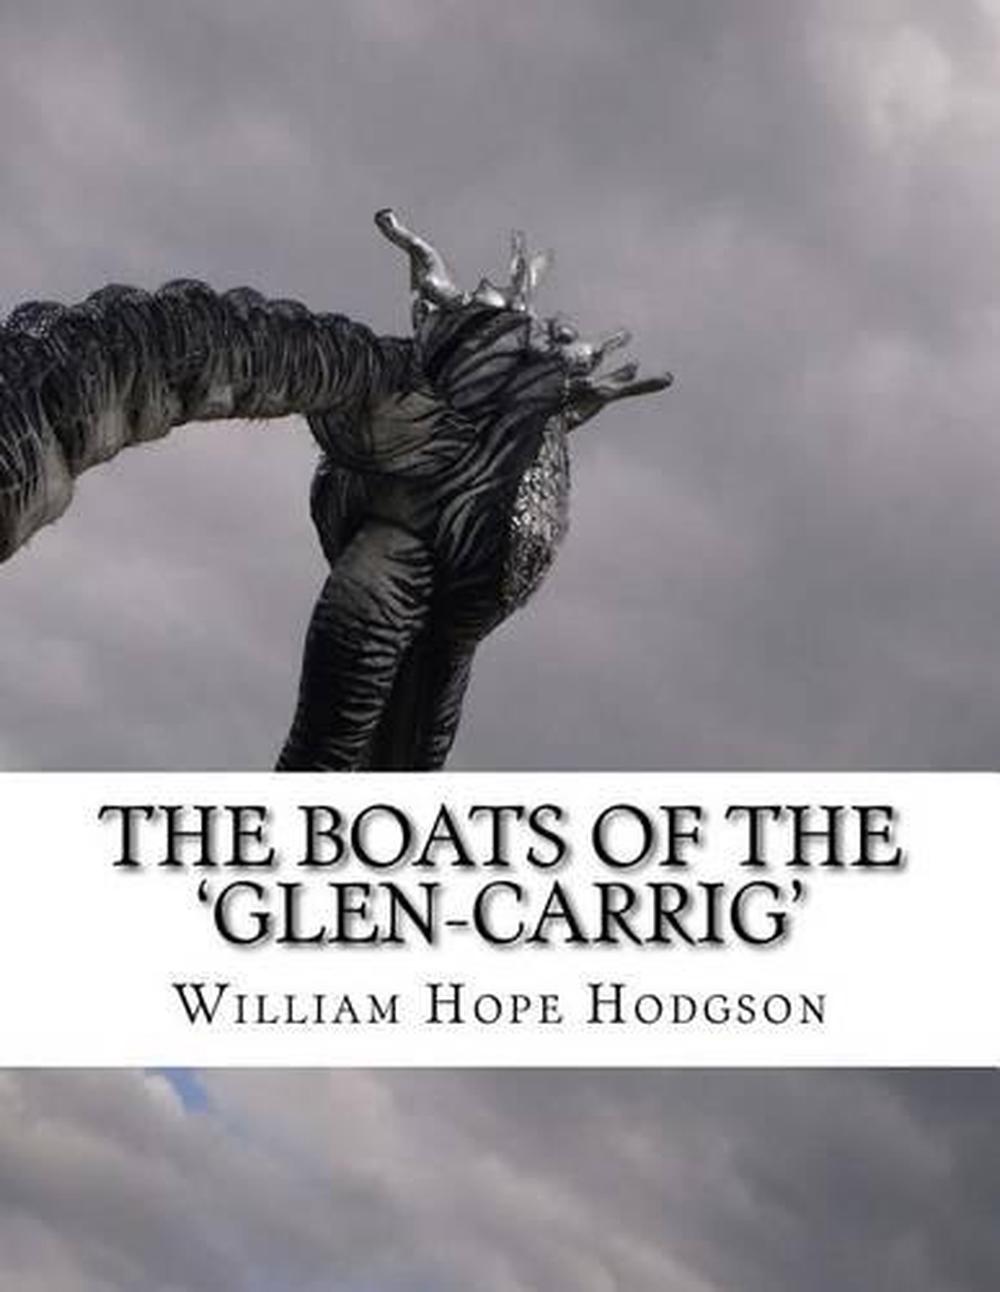 the boats of the glen carrig by william hope hodgson